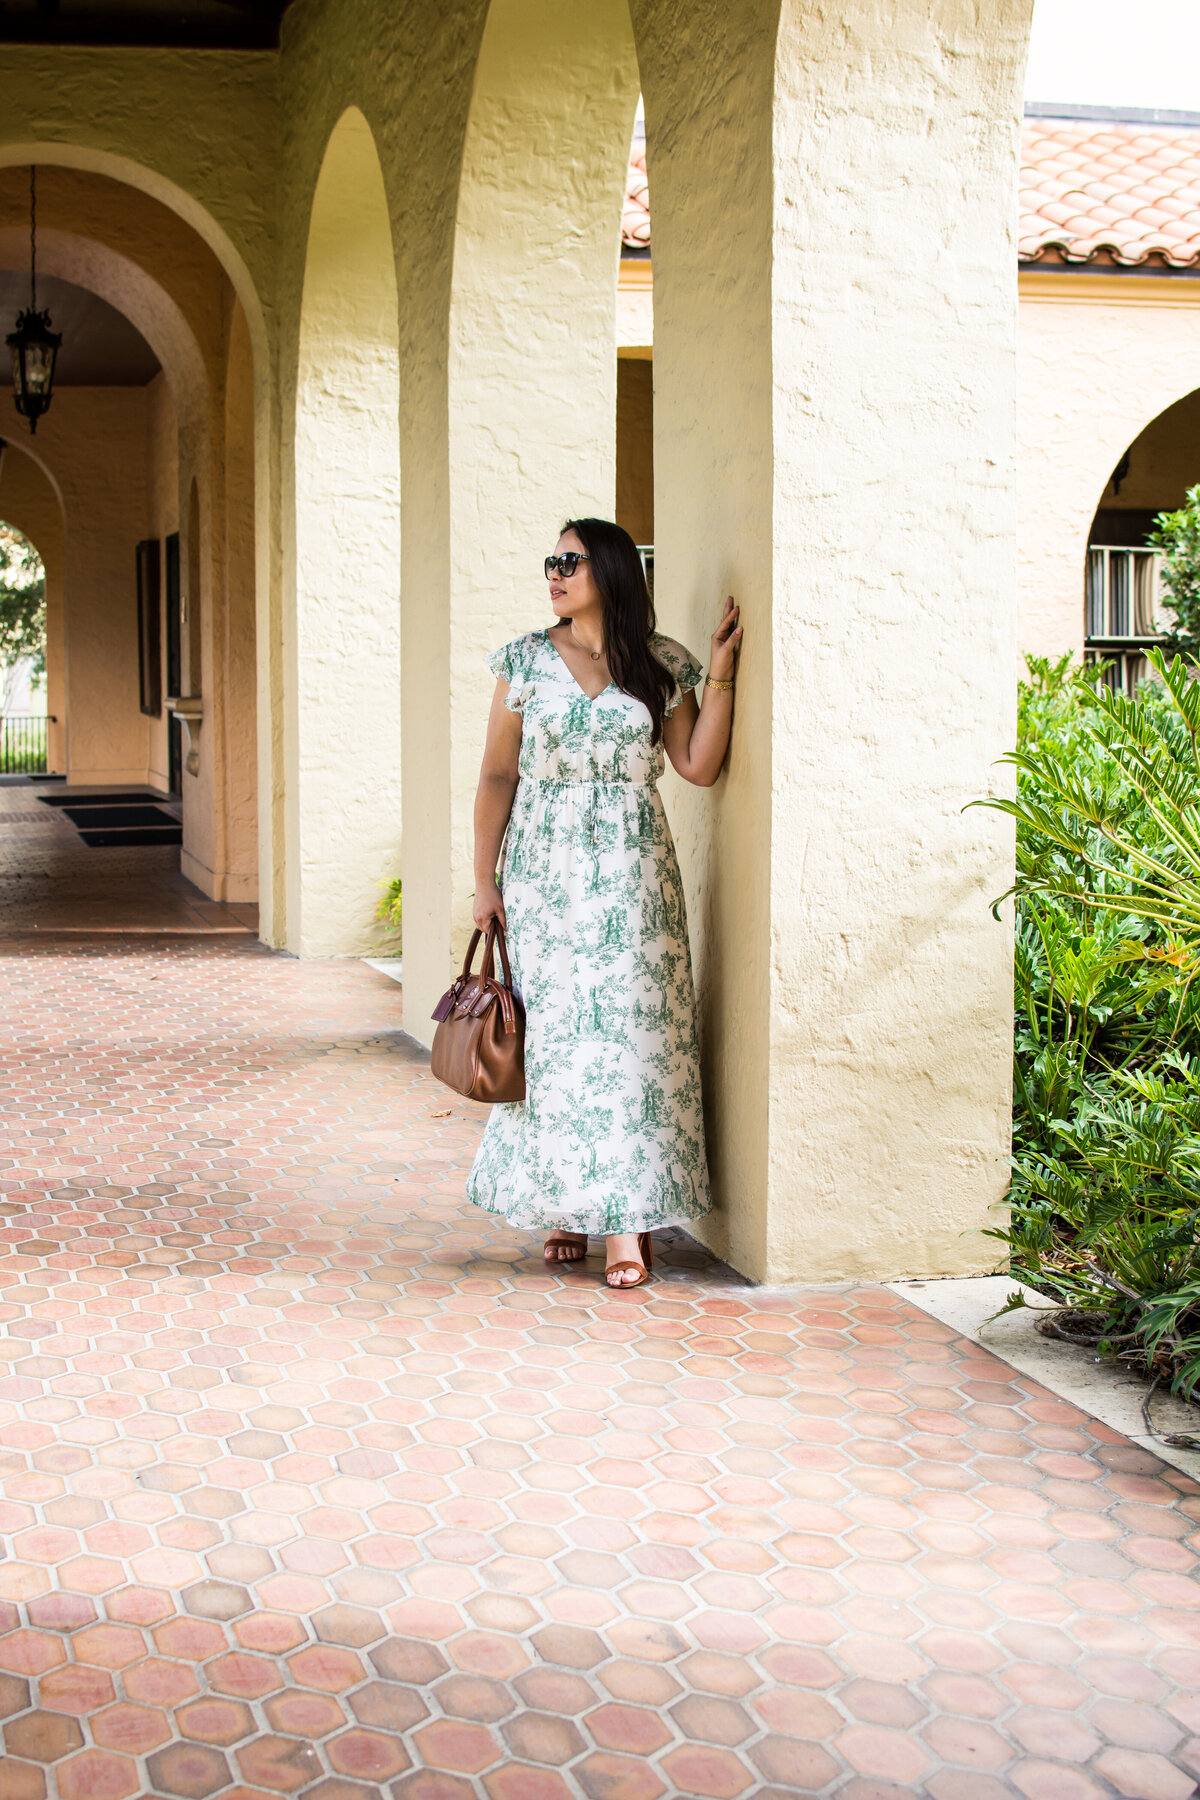 Woman with dark hair and green floral dress stands in covered walkway with arches